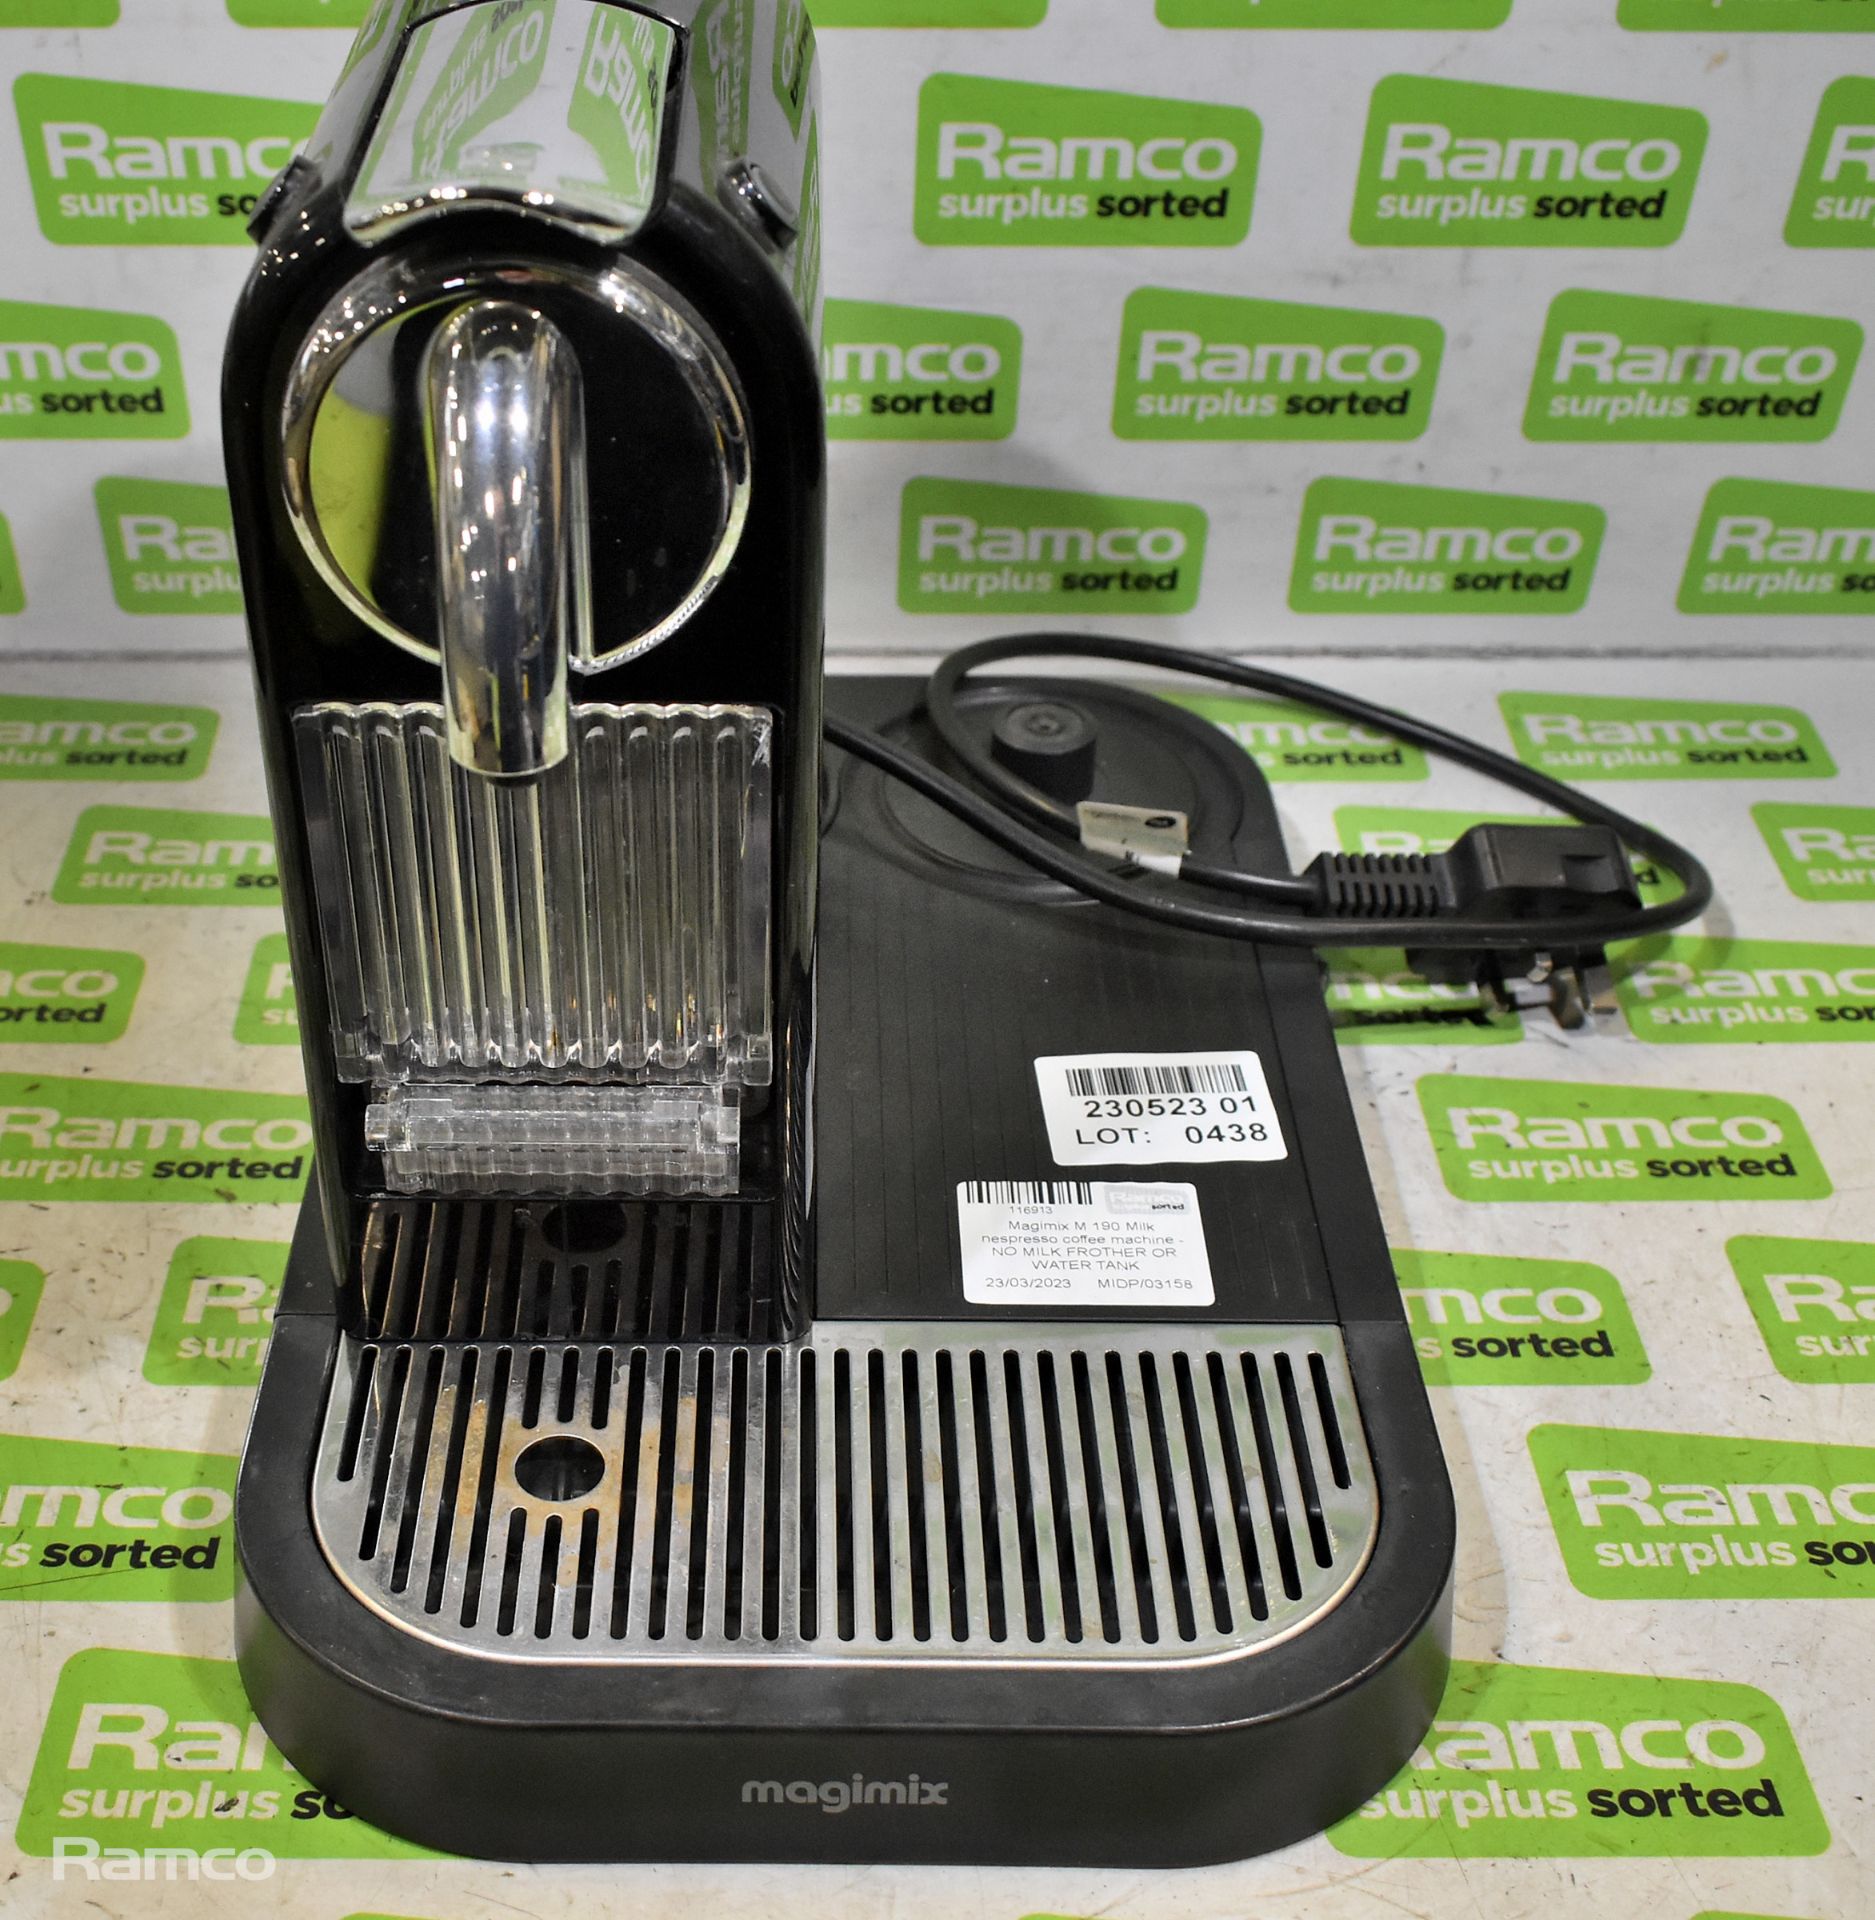 Magimix M190 Milk nespresso coffee machine - NO MILK FROTHER OR WATER TANK - Image 2 of 5